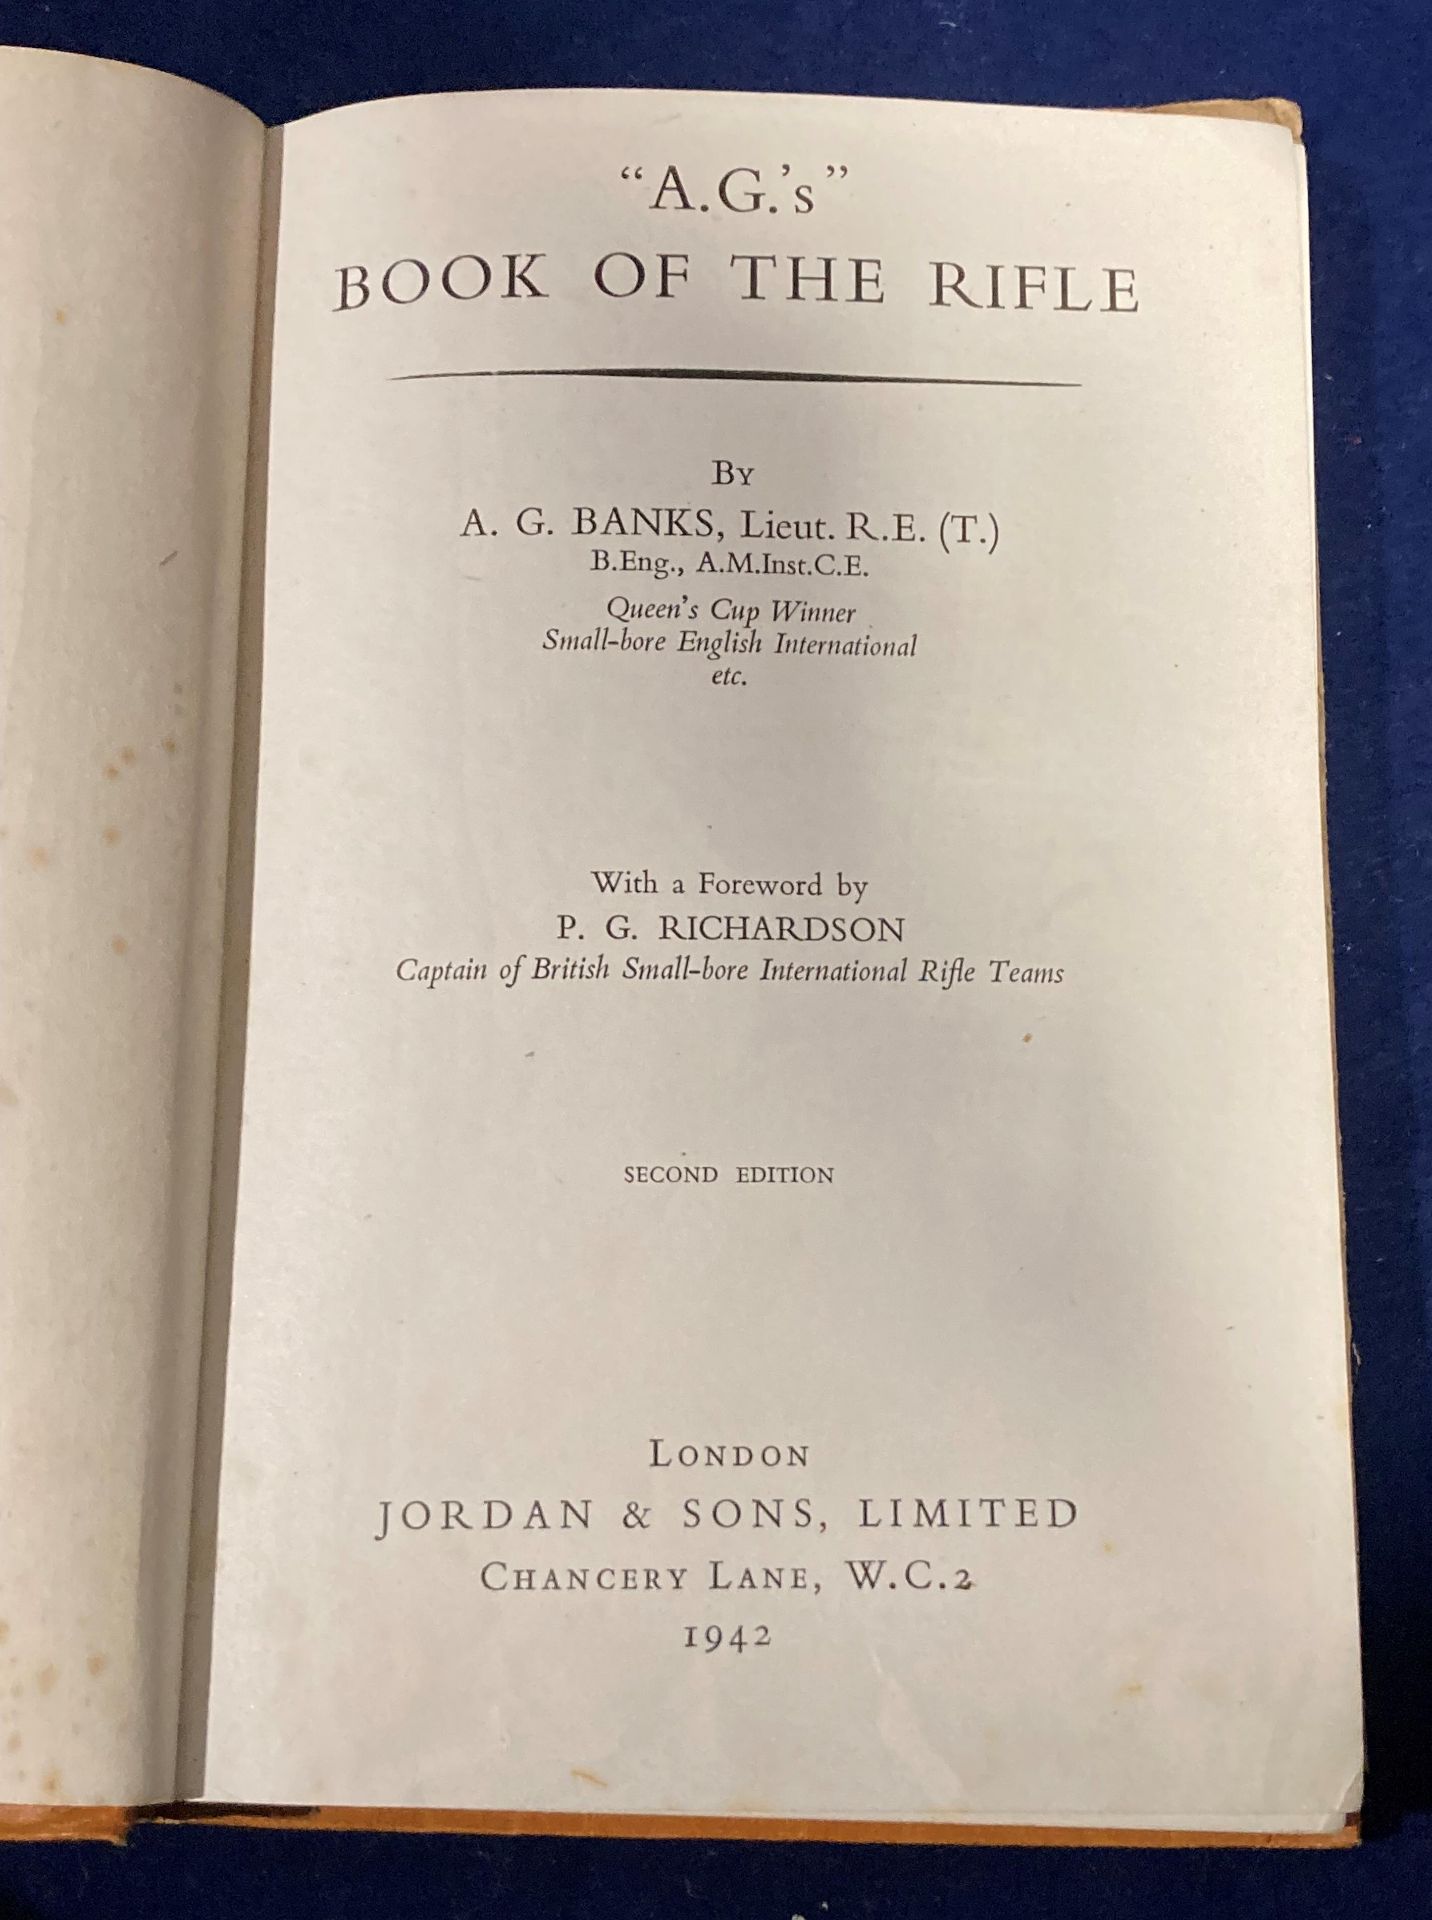 A G Banks Lieut RE (T) B Eng A M Inst CE "A G's Book of the Rifle" second edition with dust cover - Image 3 of 6